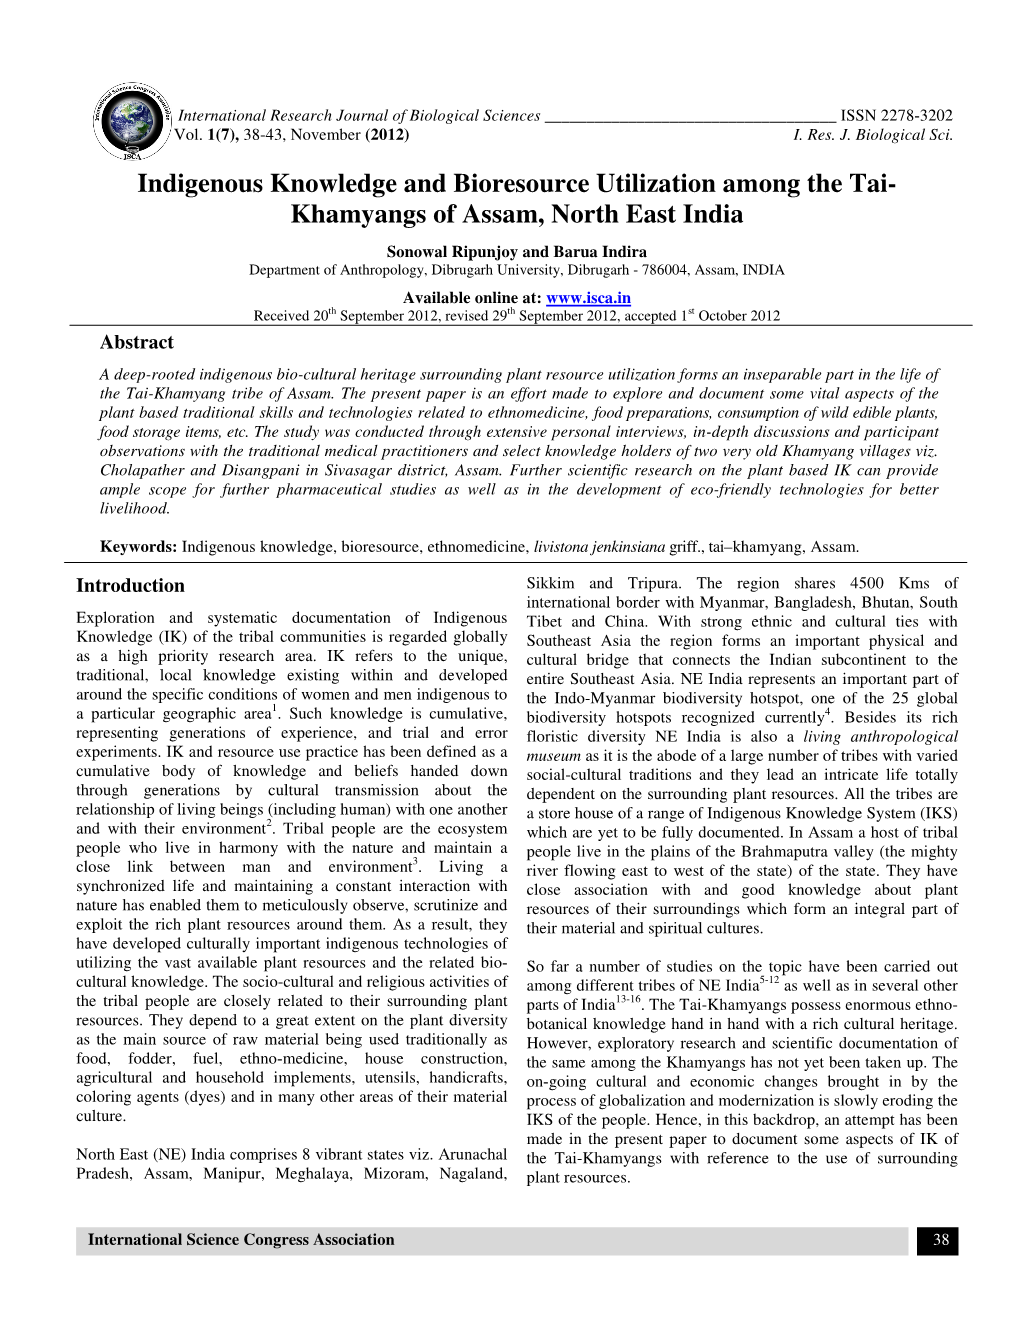 Indigenous Knowledge and Bioresource Utilization Among the Tai- Khamyangs of Assam, North East India